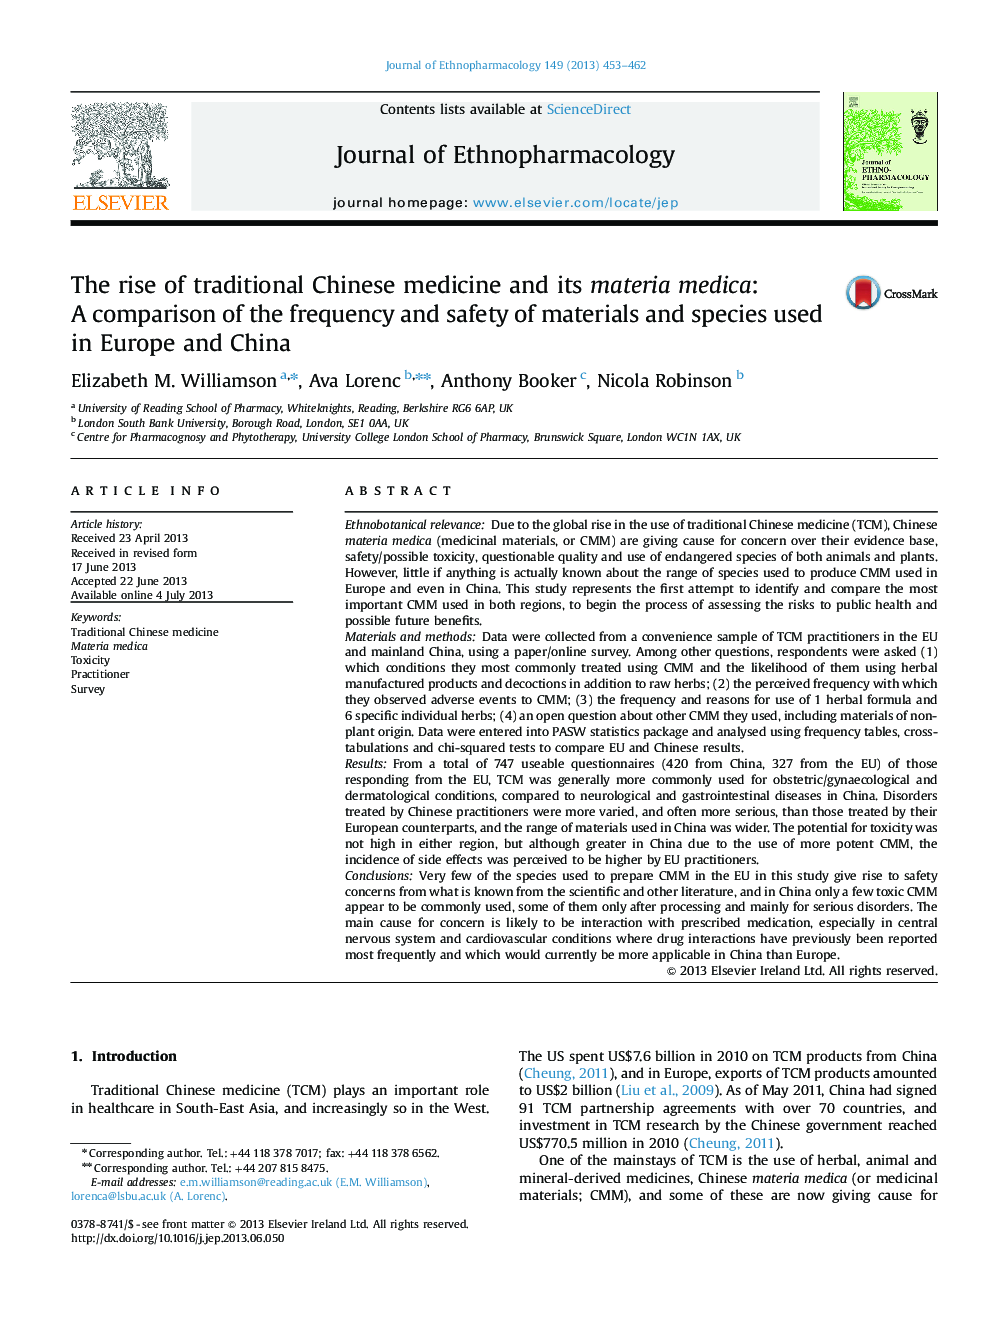 The rise of traditional Chinese medicine and its materia medica: A comparison of the frequency and safety of materials and species used in Europe and China